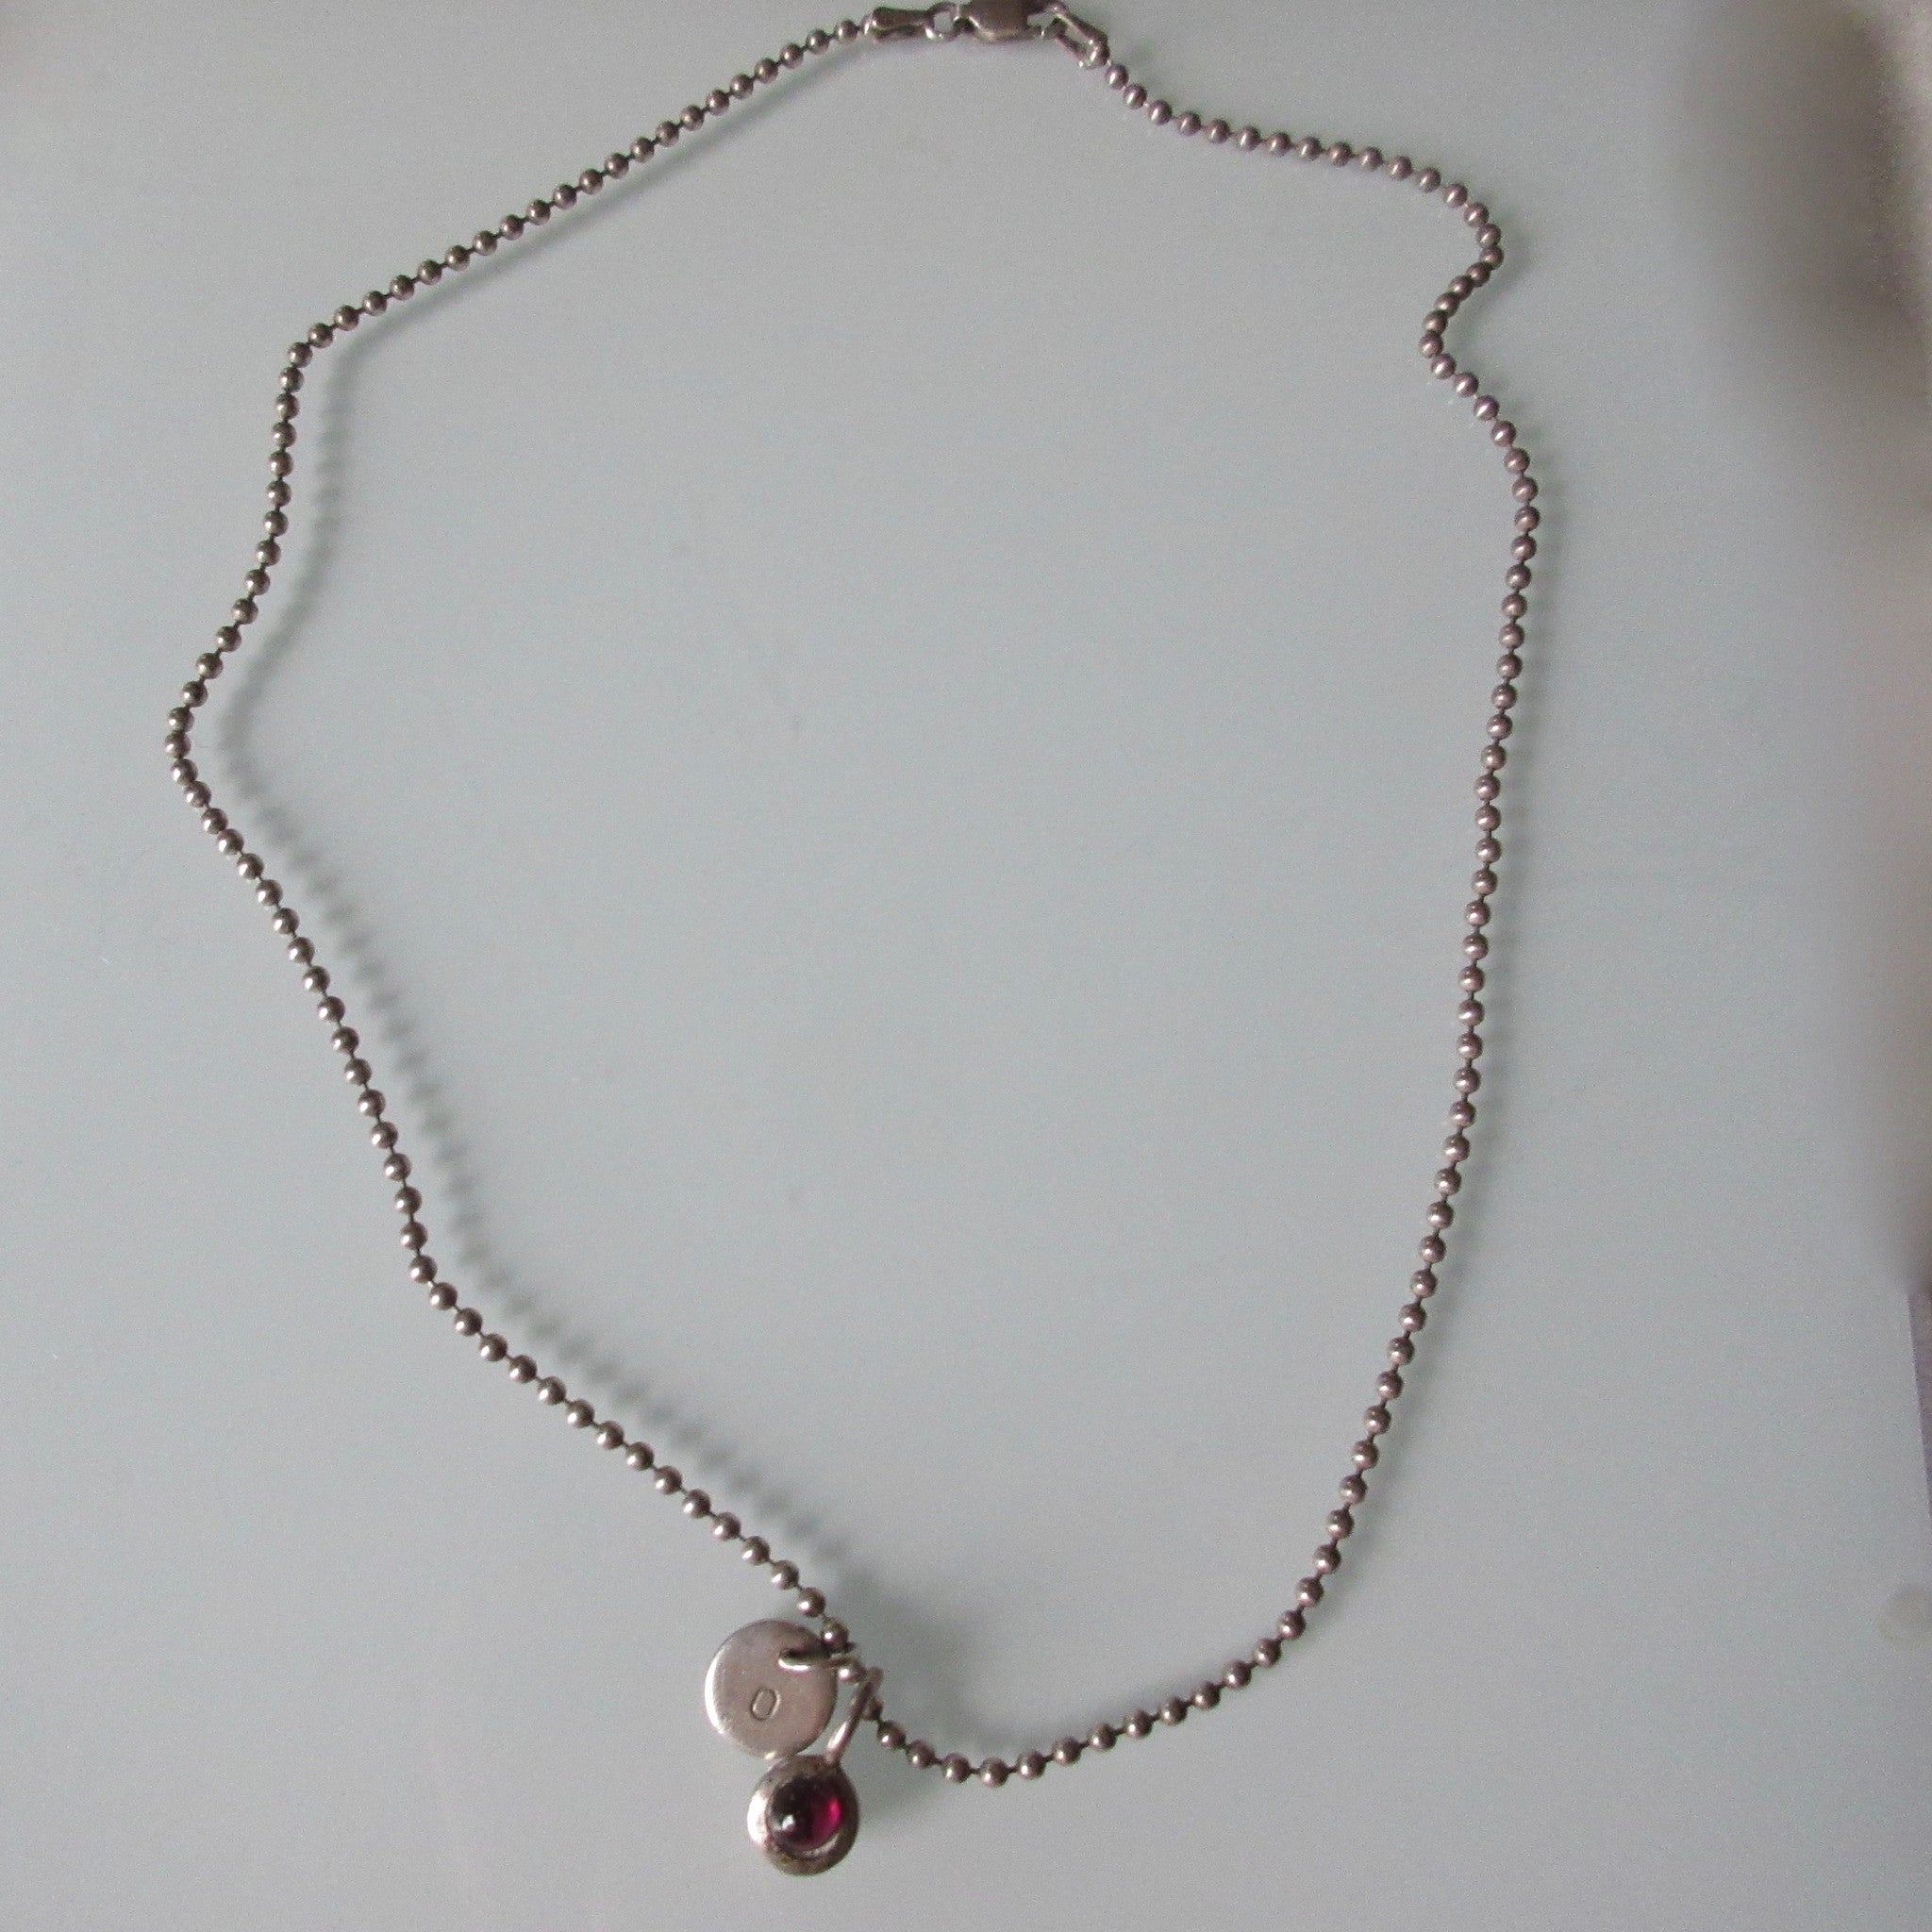 Garrent Pendant on Sterling Silver Chain 16"